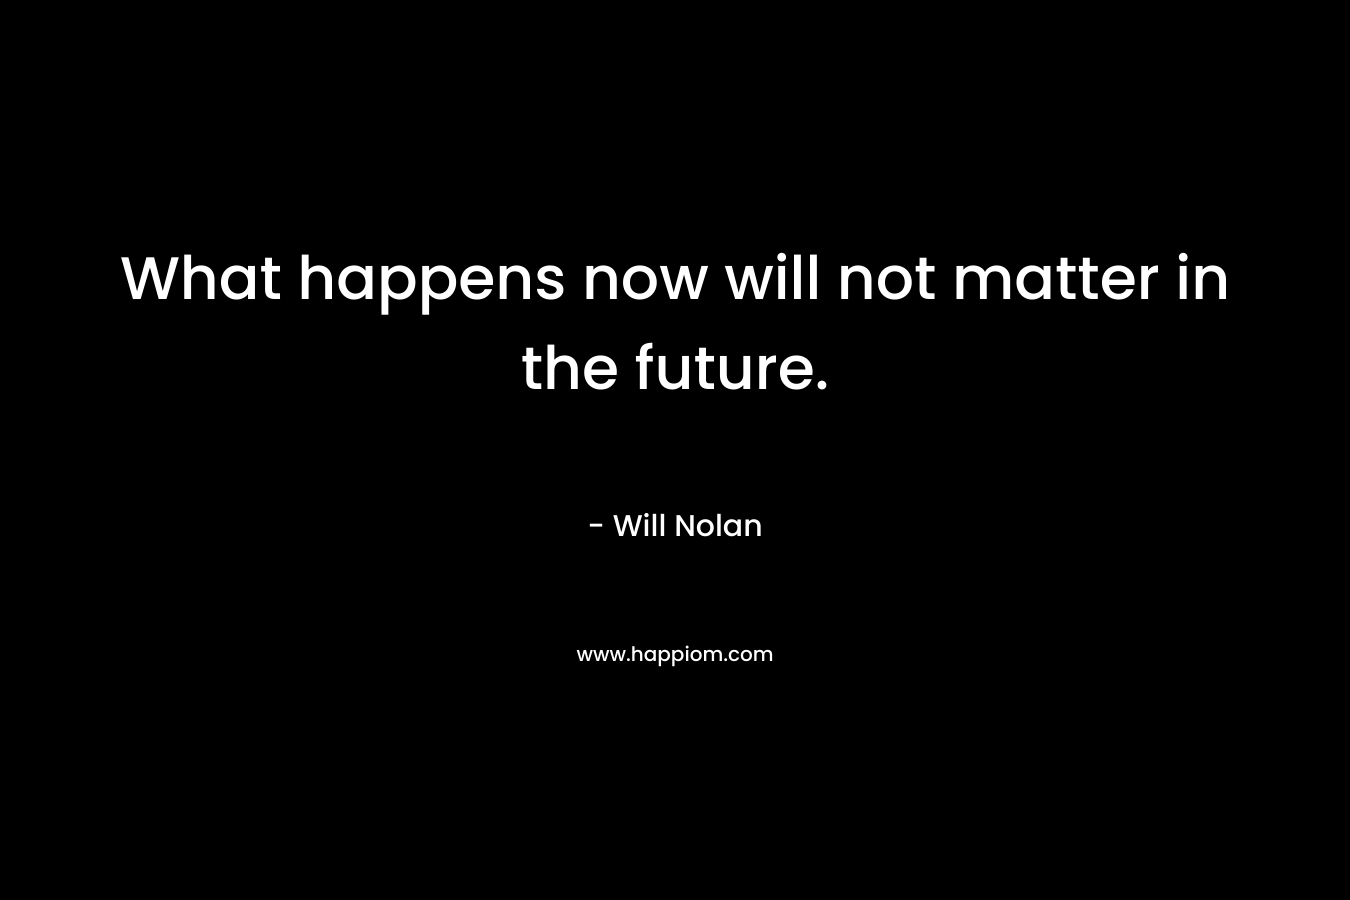 What happens now will not matter in the future.